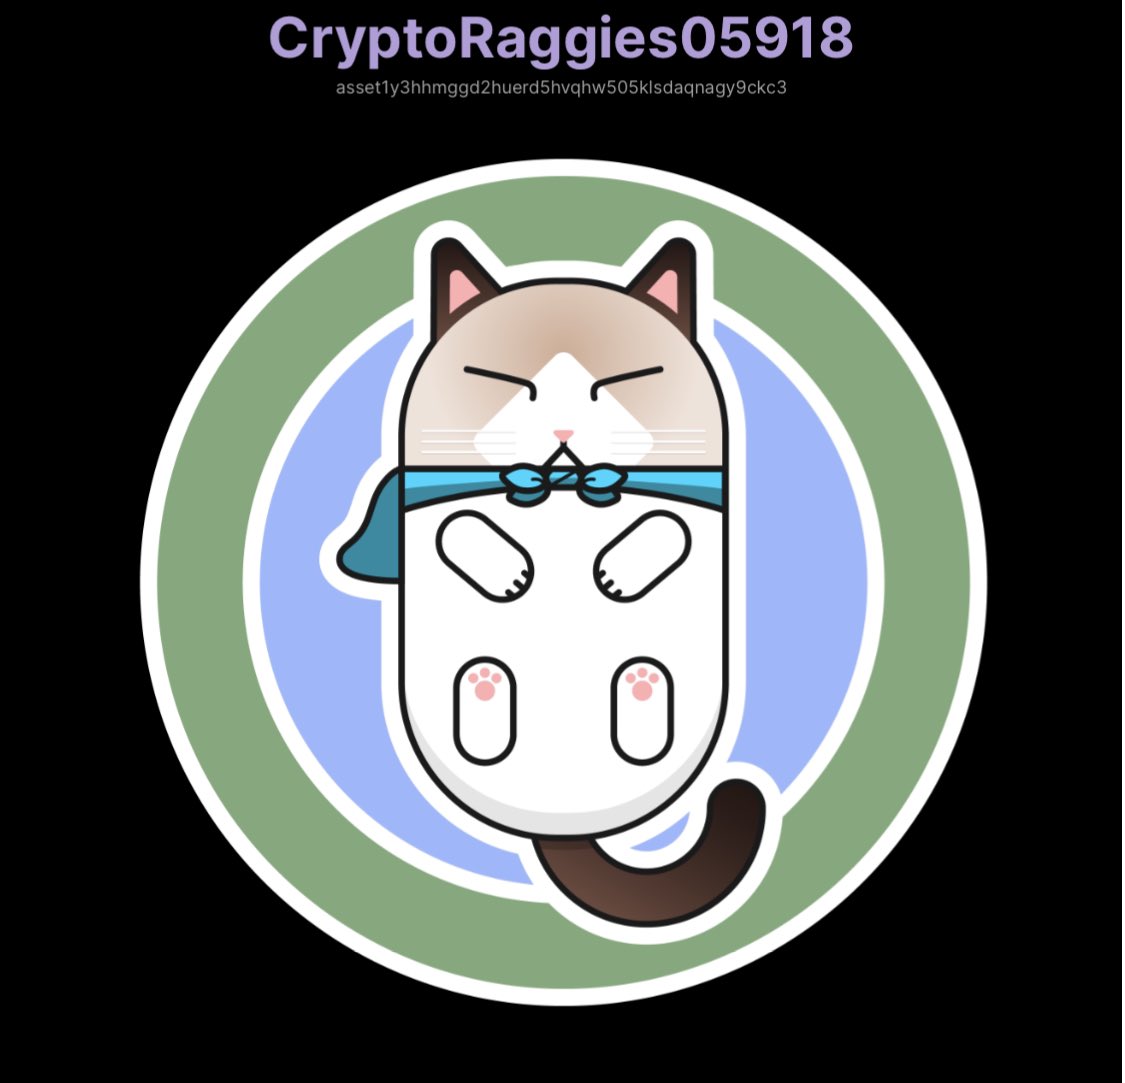 Gm ☕️ Mark this date Friday 25/8/23 18:00pm UTC! A snapshot of all wallets holding Adadigies will be taken for the first Digidraw!! If it’s listed it won’t count! Win this @CryptoRaggies just for holding 💯🔥